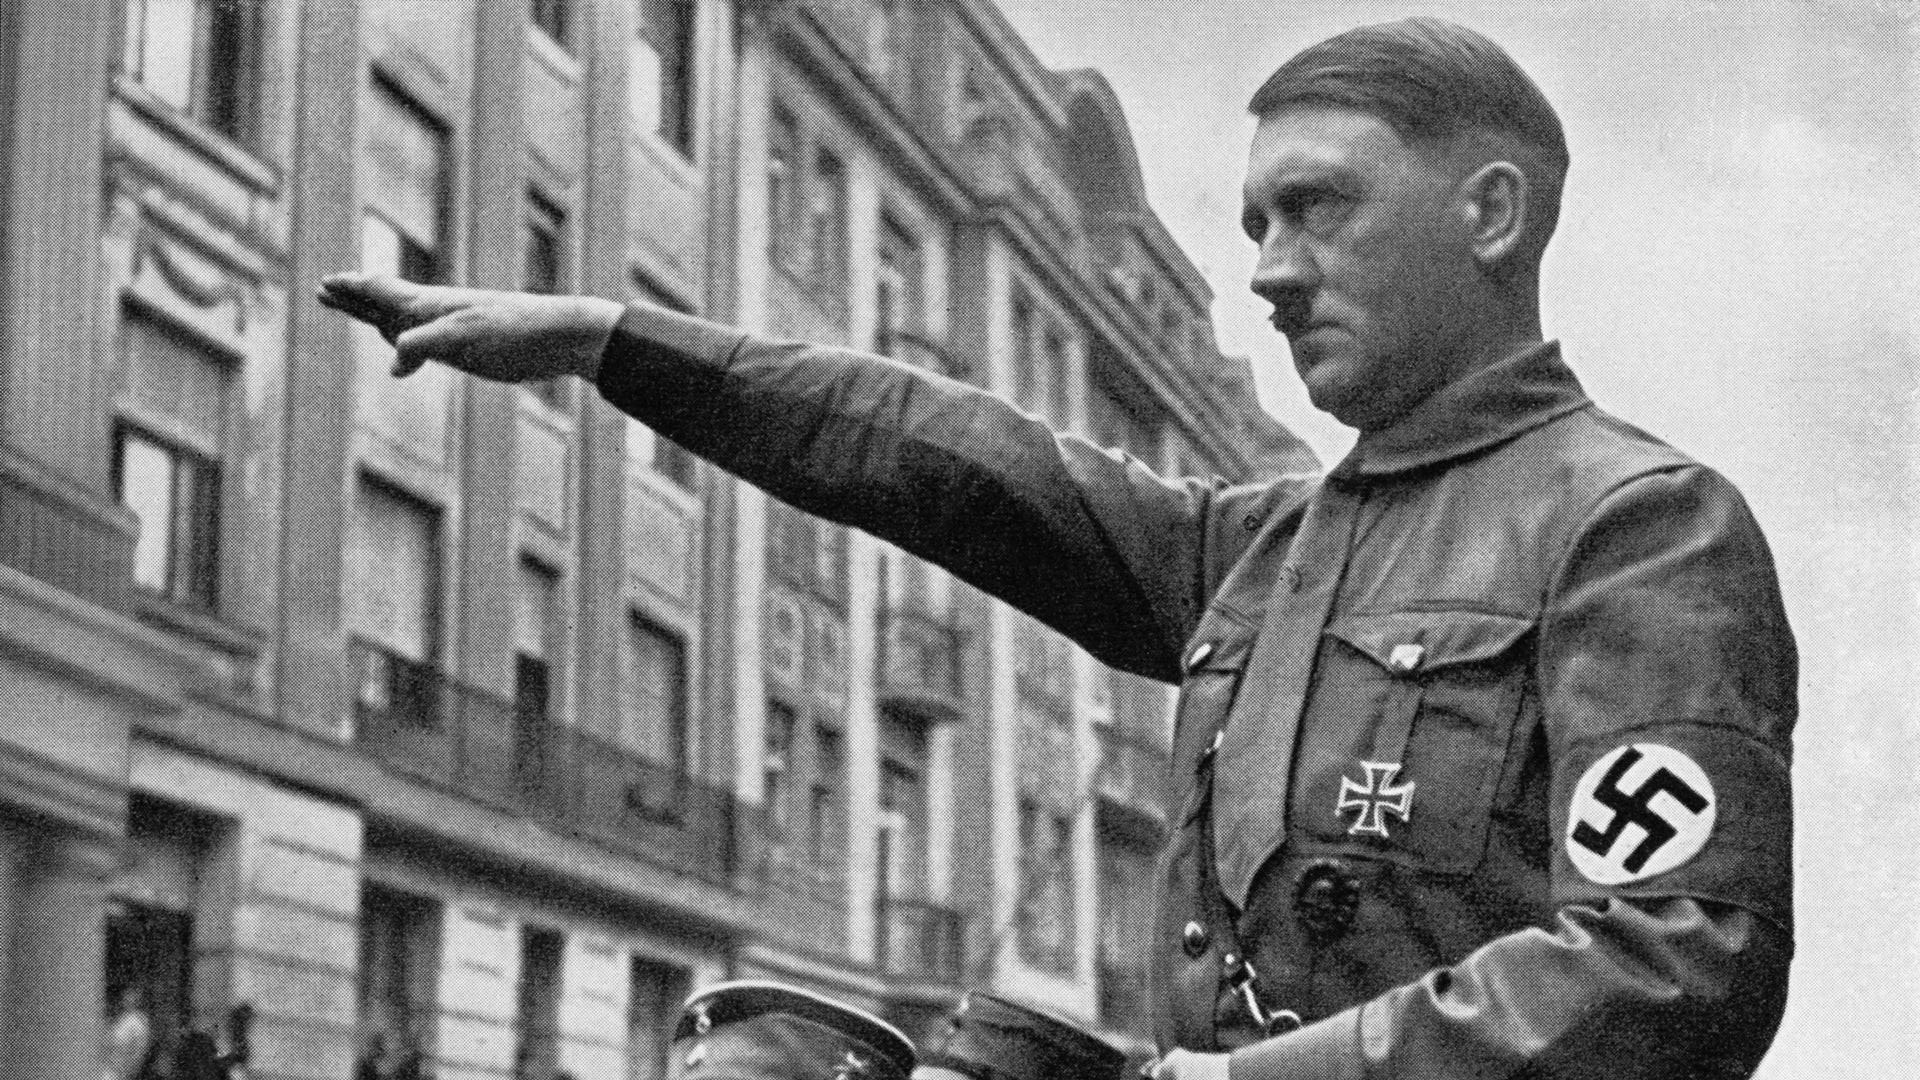 The Making of a Dictator: 10 Pivotal Facts About Hitler's Rise to Power